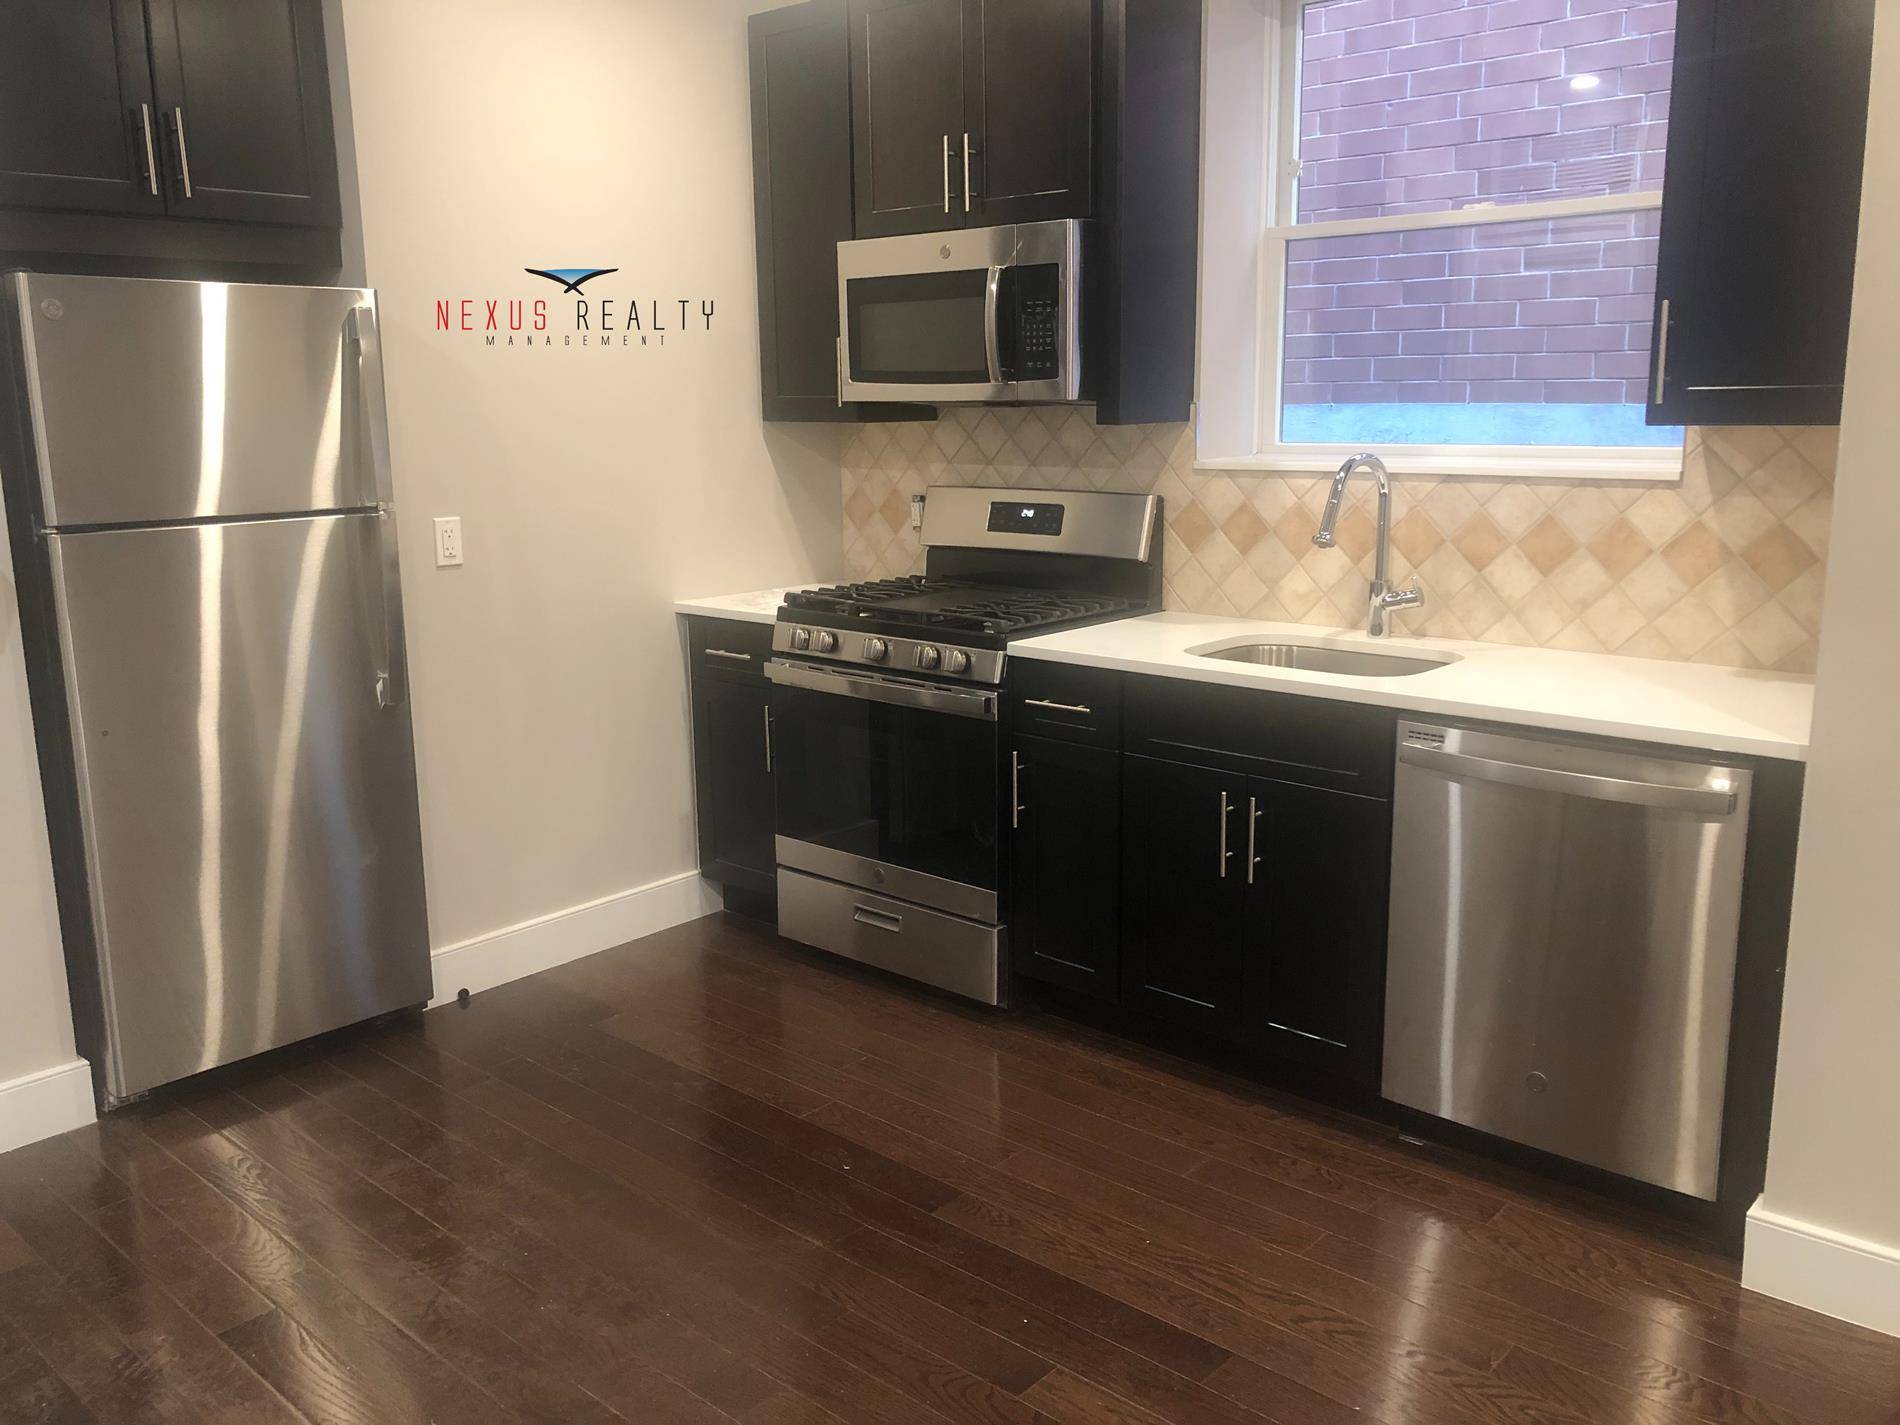 Renovated 2 Bedroom apartment in Astoria 2600 NO BROKERS FEE2 bedrooms on the 3rd floor in a 4 story walk up buildingOpen kitchen with stainless steel appliances, microwave, dishwasher, and ...